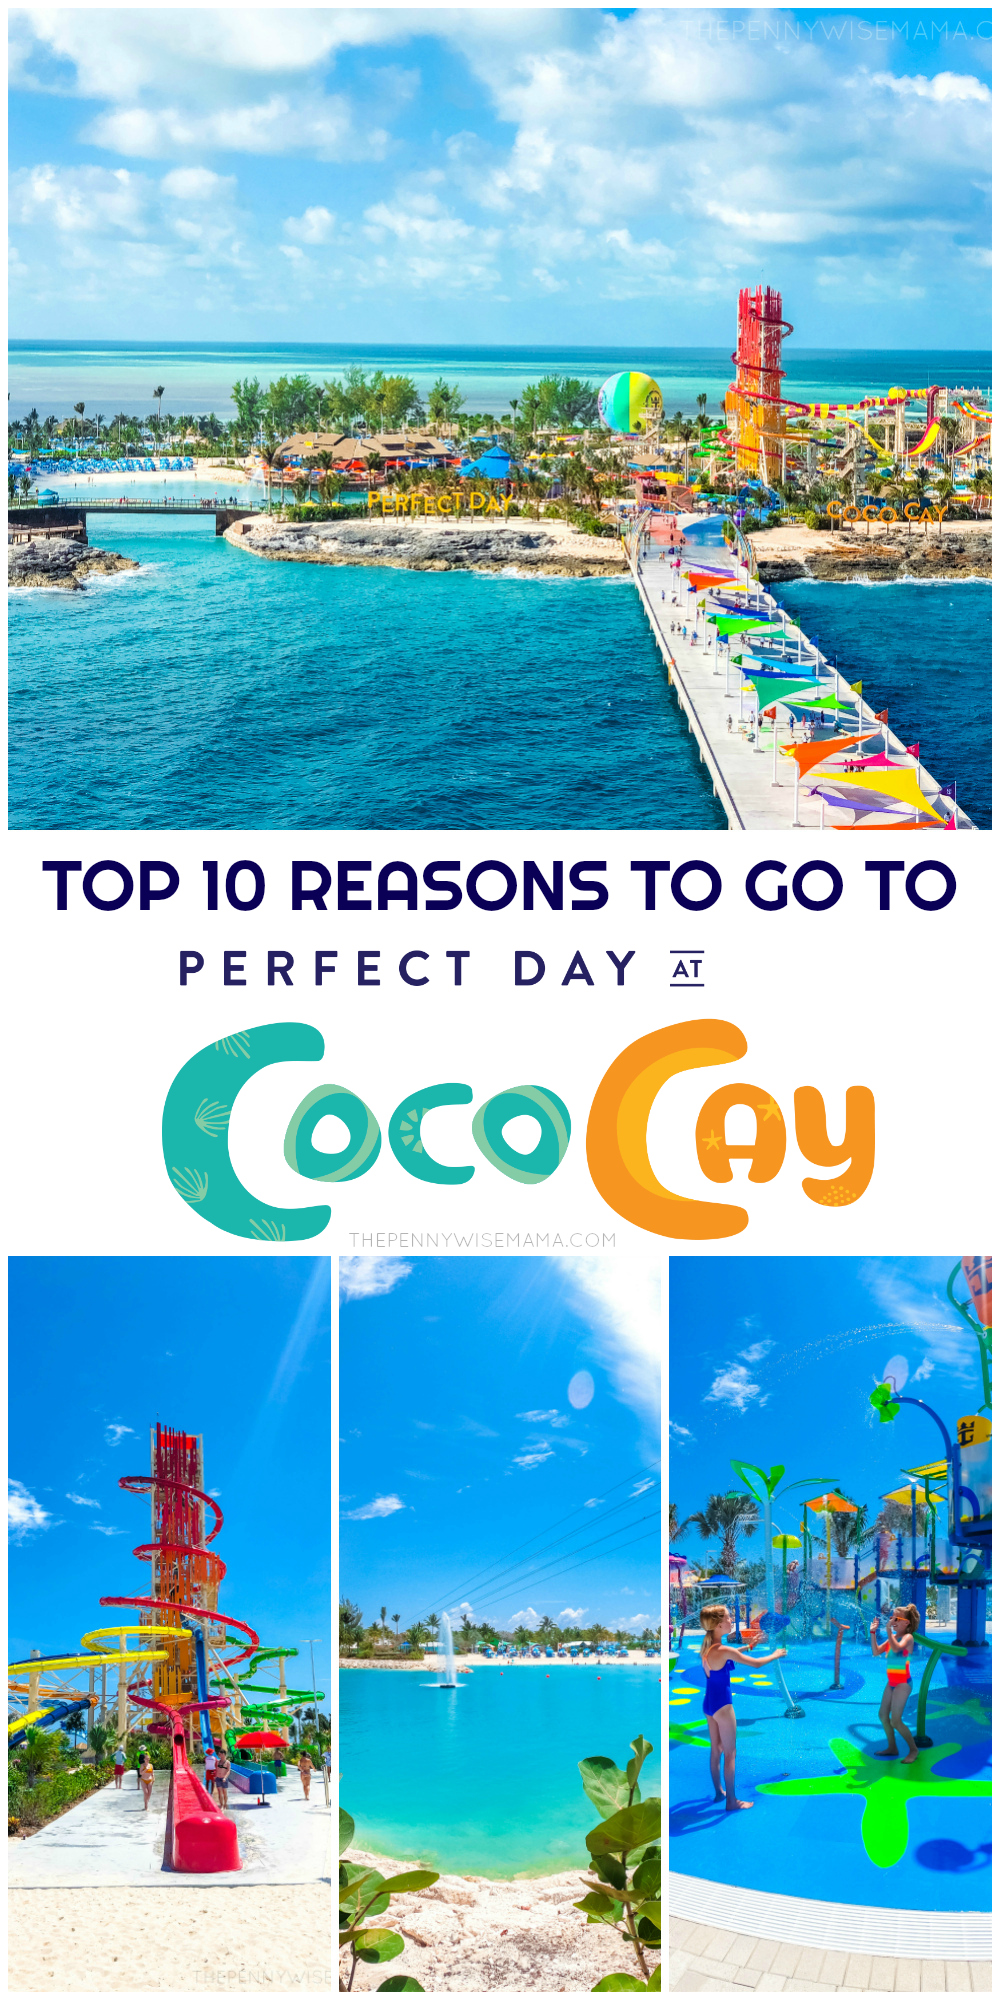 Top 10 Reasons to Go to Perfect Day at CocoCay, Royal Caribbean's New Private Island!